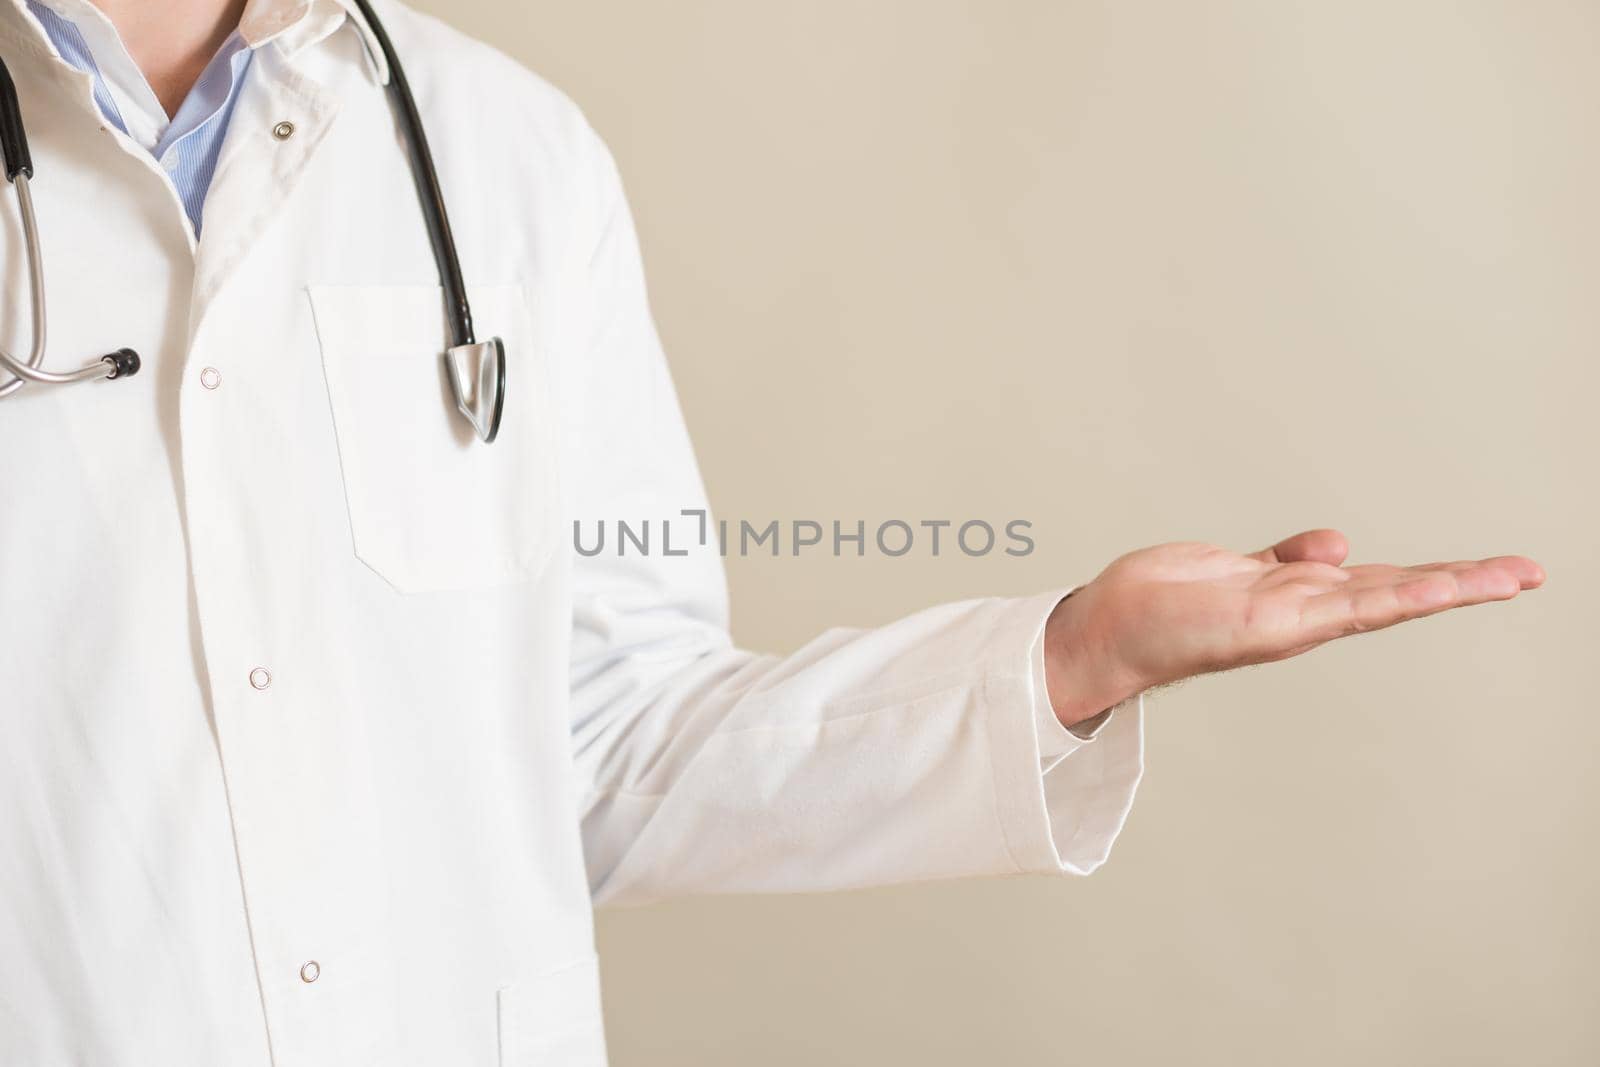 Image of male doctor gesturing.